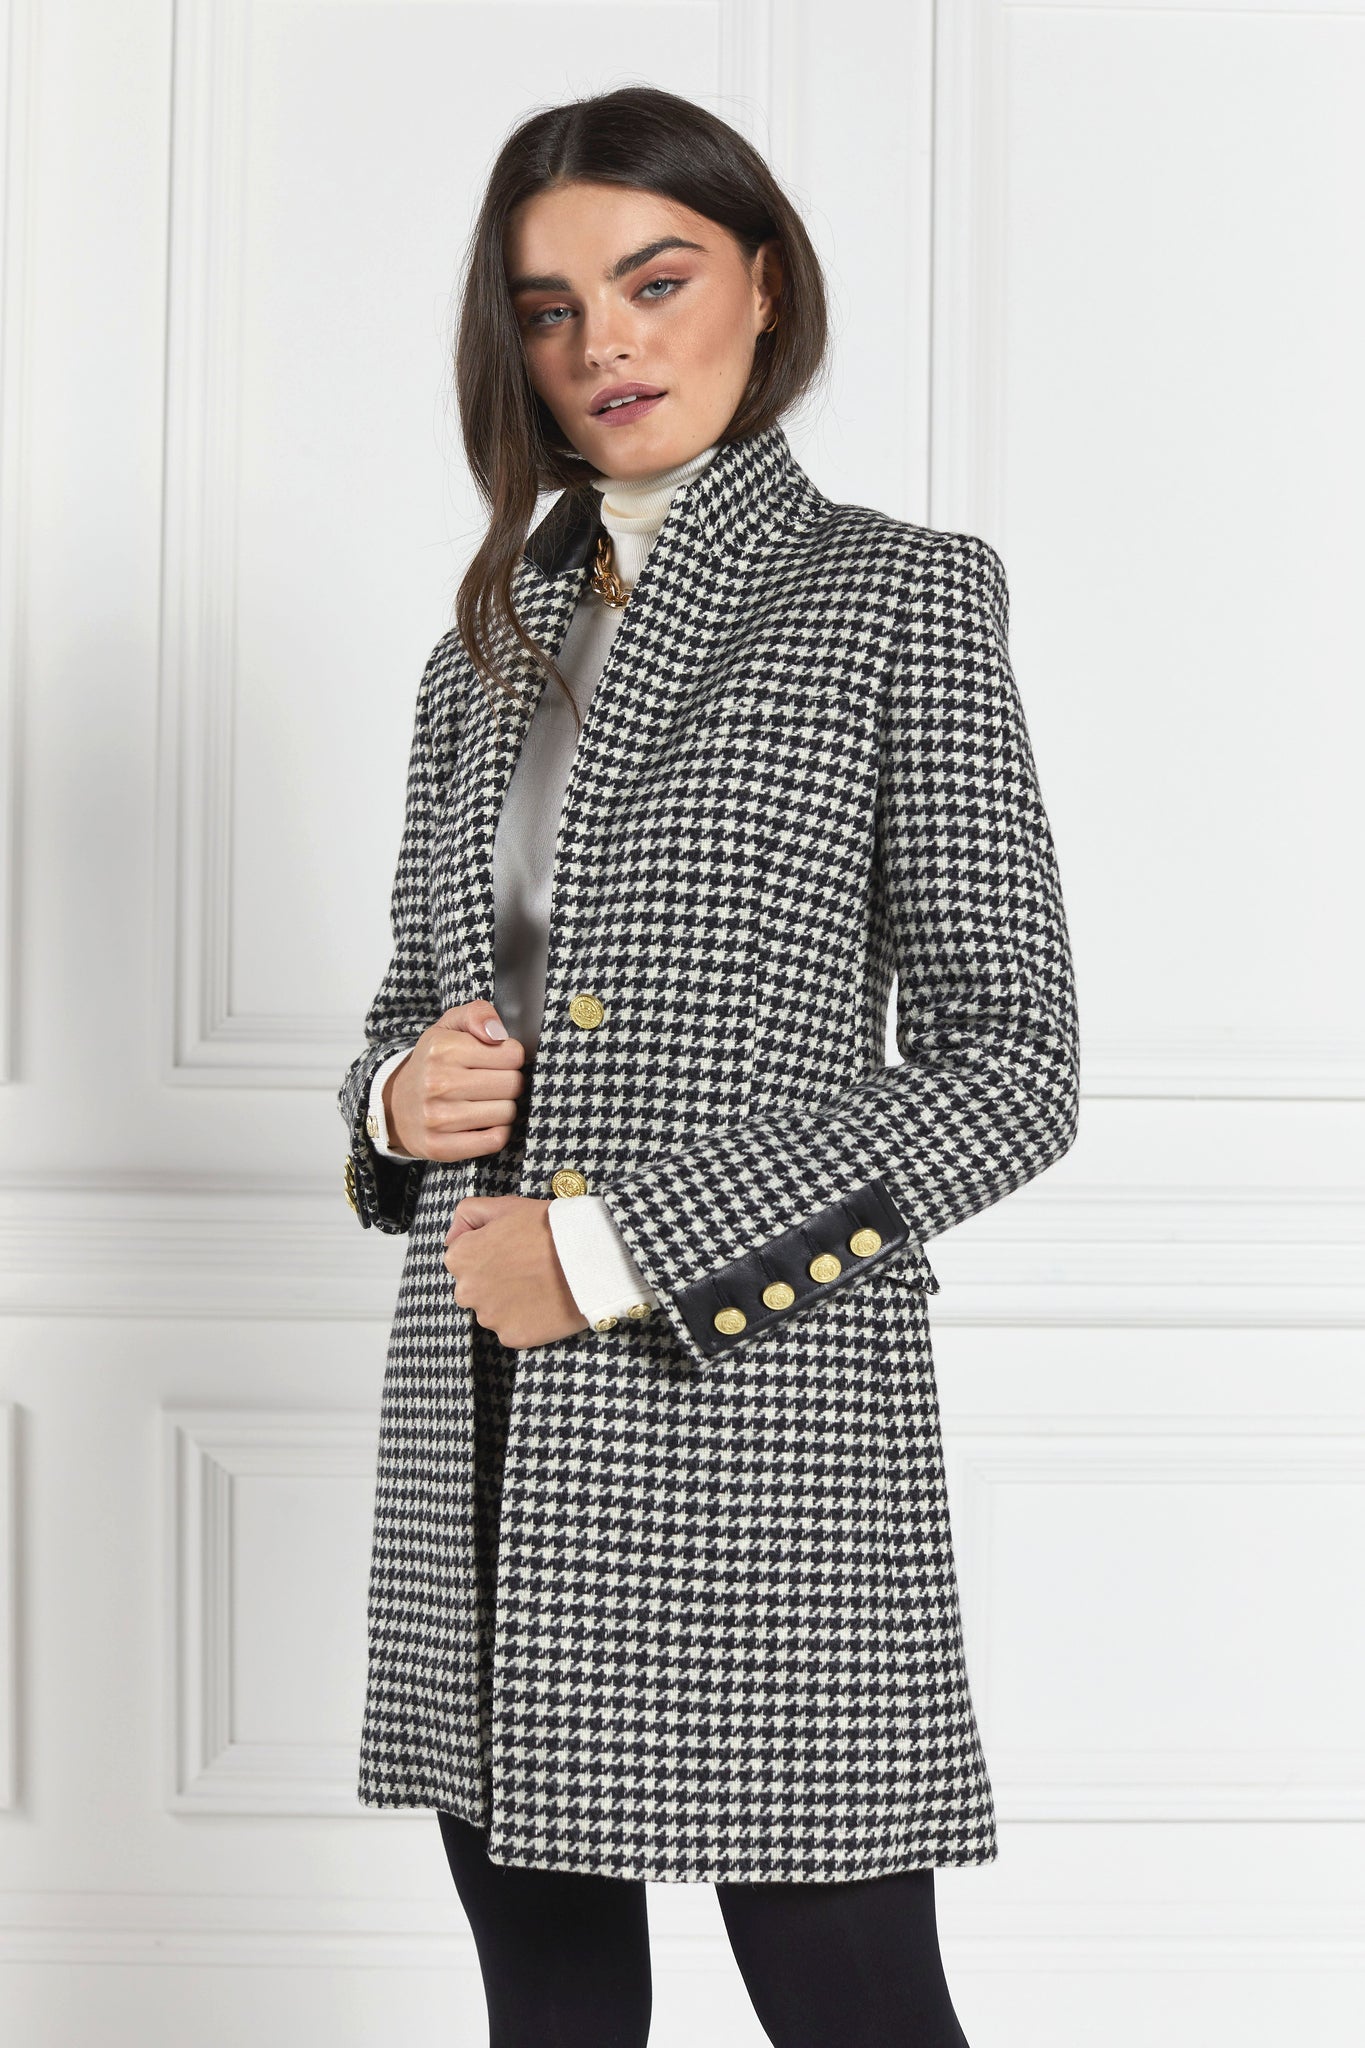 white and black houndstooth tweed womens coat with gold hardware and black leather detailing